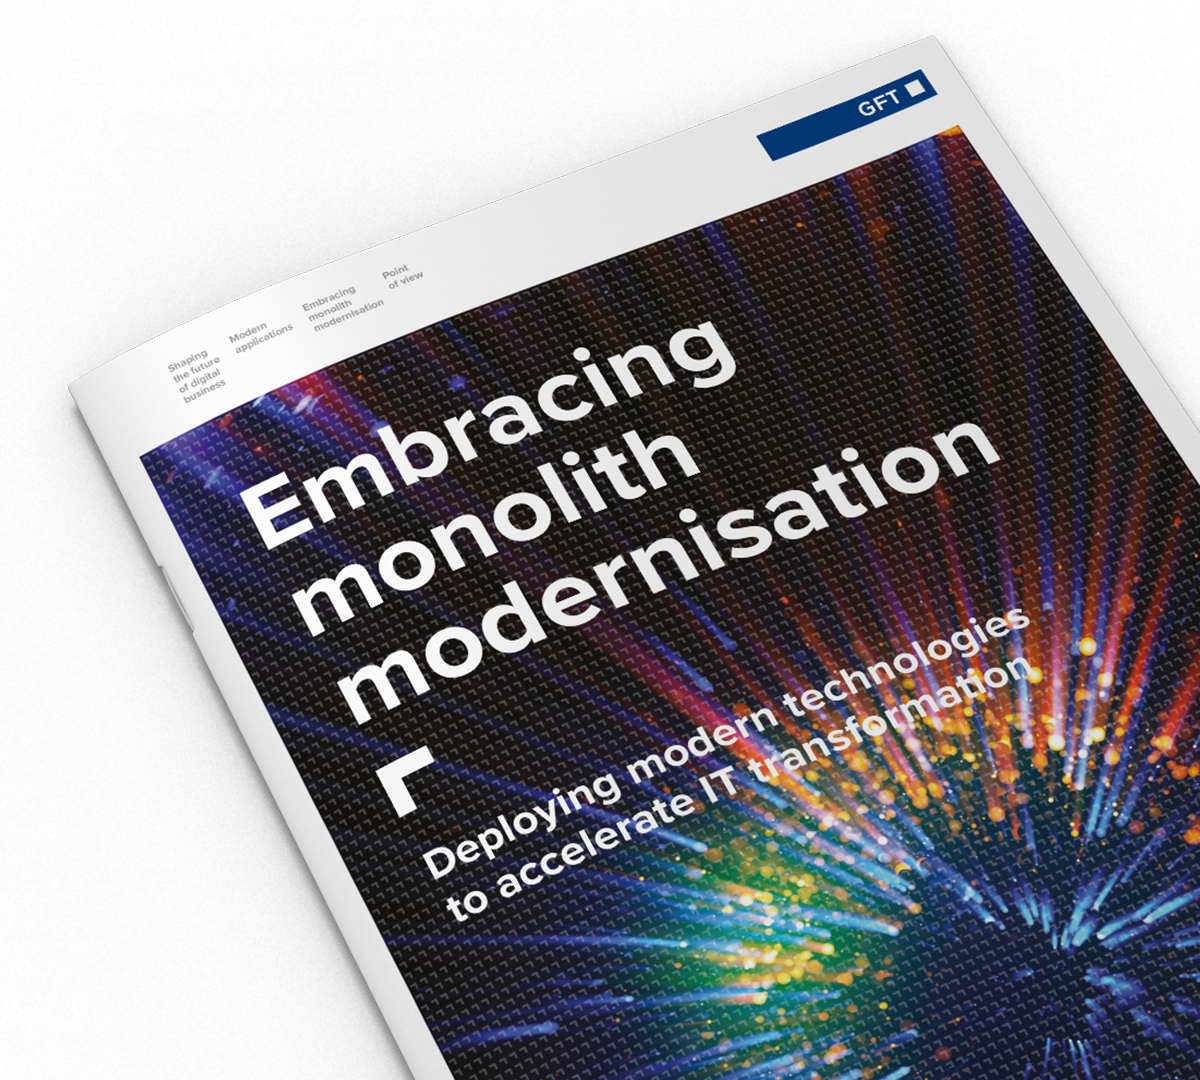 Read how a sequential mainframe modernisation offers a roadmap to modern methods and technologies without the cost or risk of a wholesale migration.